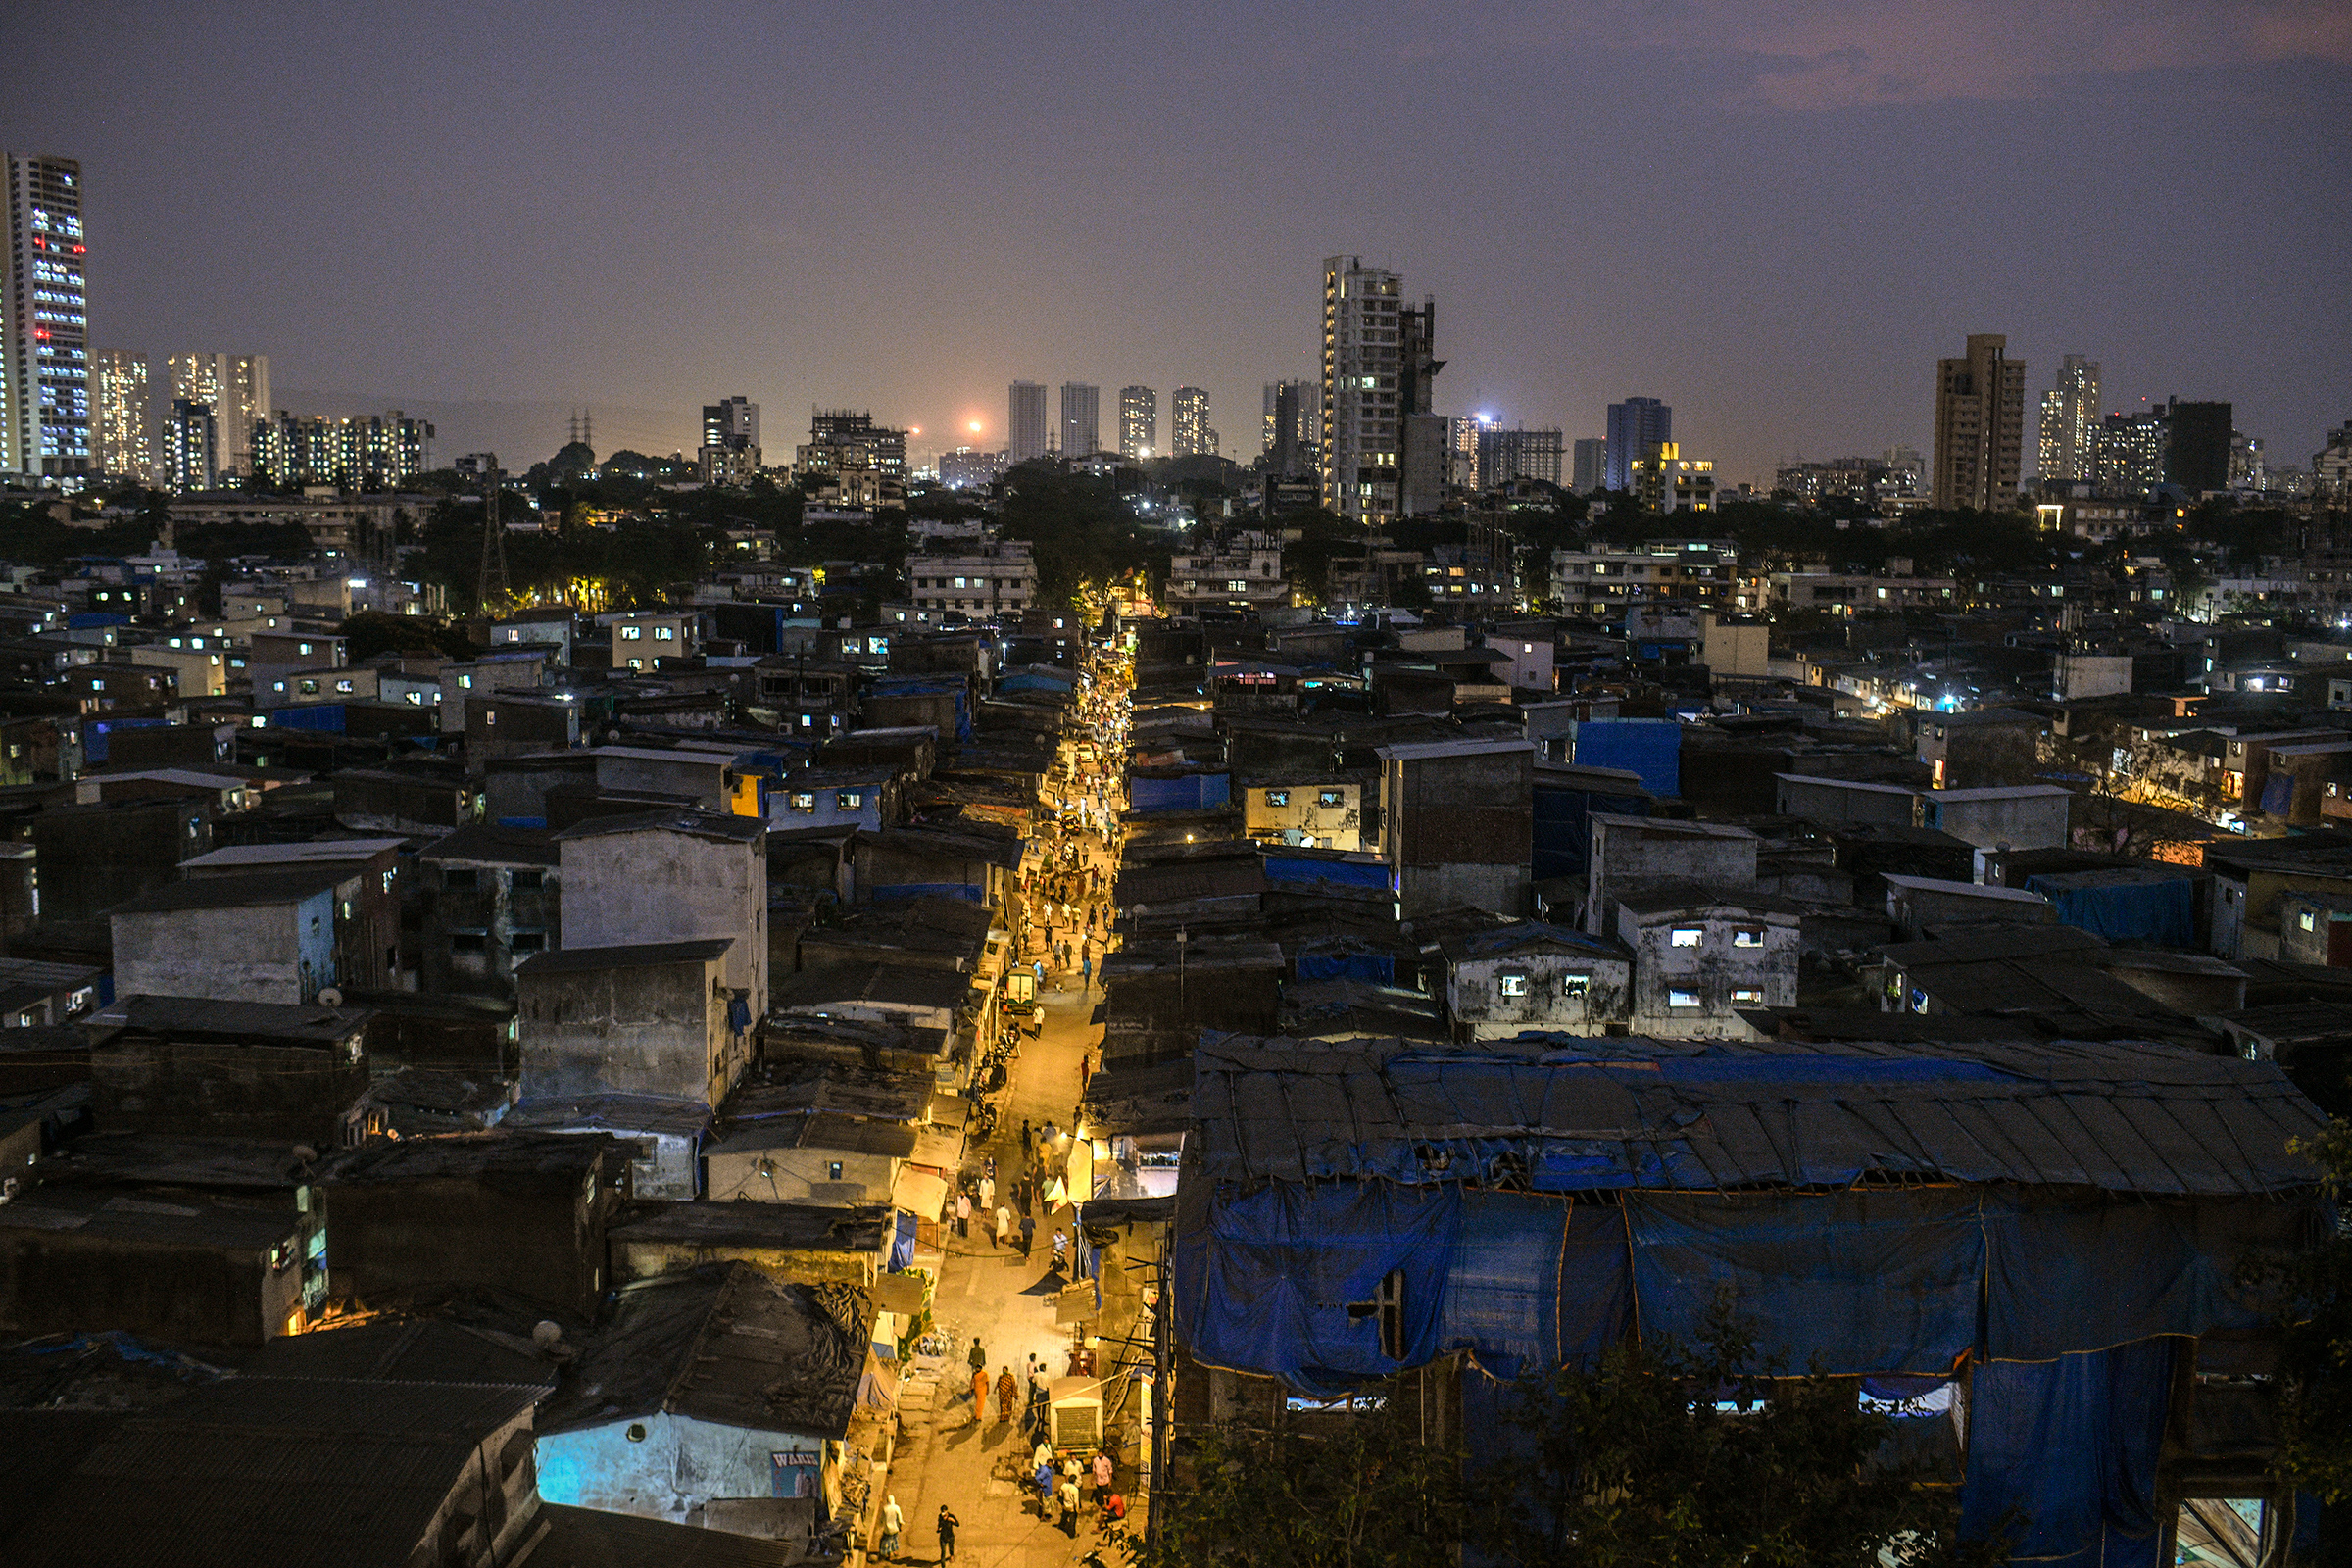 Dharavi in late April. The hyper-dense network of brick homes and small scale enterprises, which sprawl in the shadow of shiny new skyscrapers, was home to a thriving economy—until recently. (Atul Loke—The New York Times/Redux)